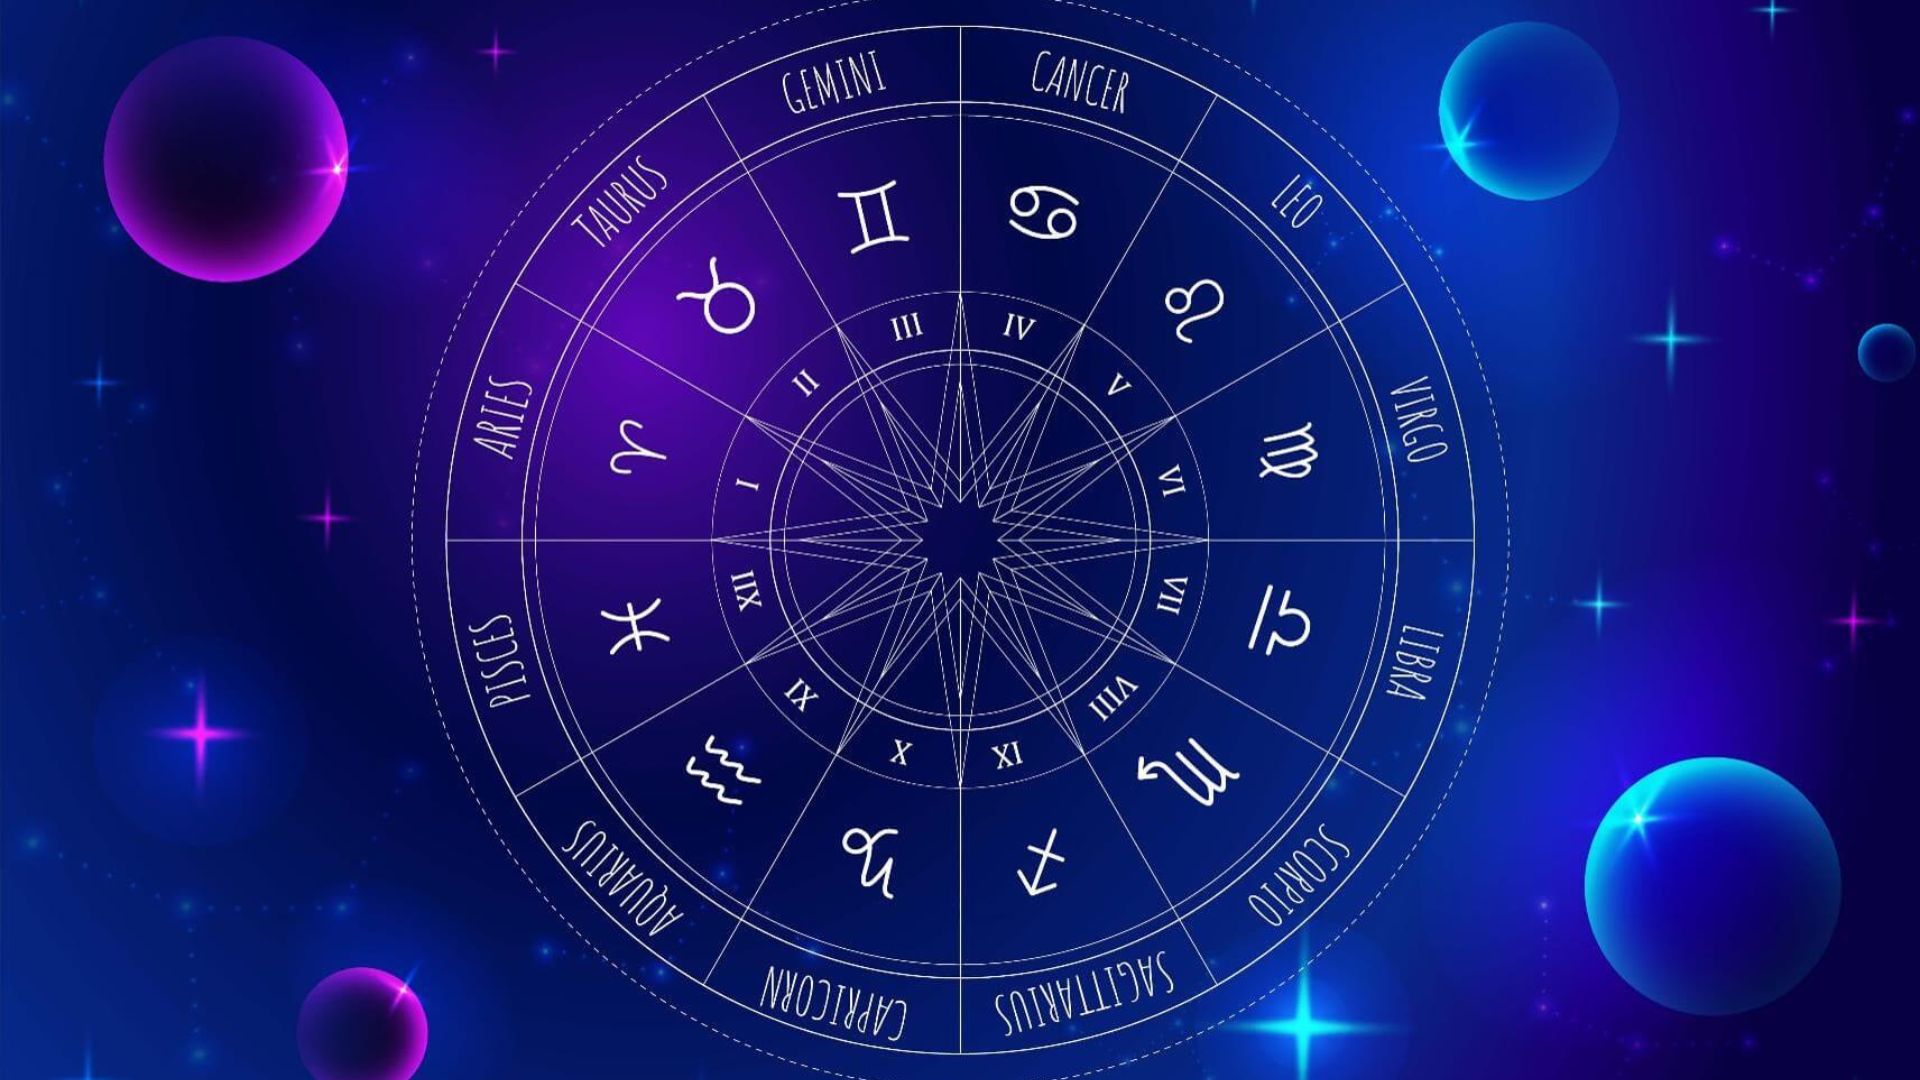 Zodiac Signs With Purple Background